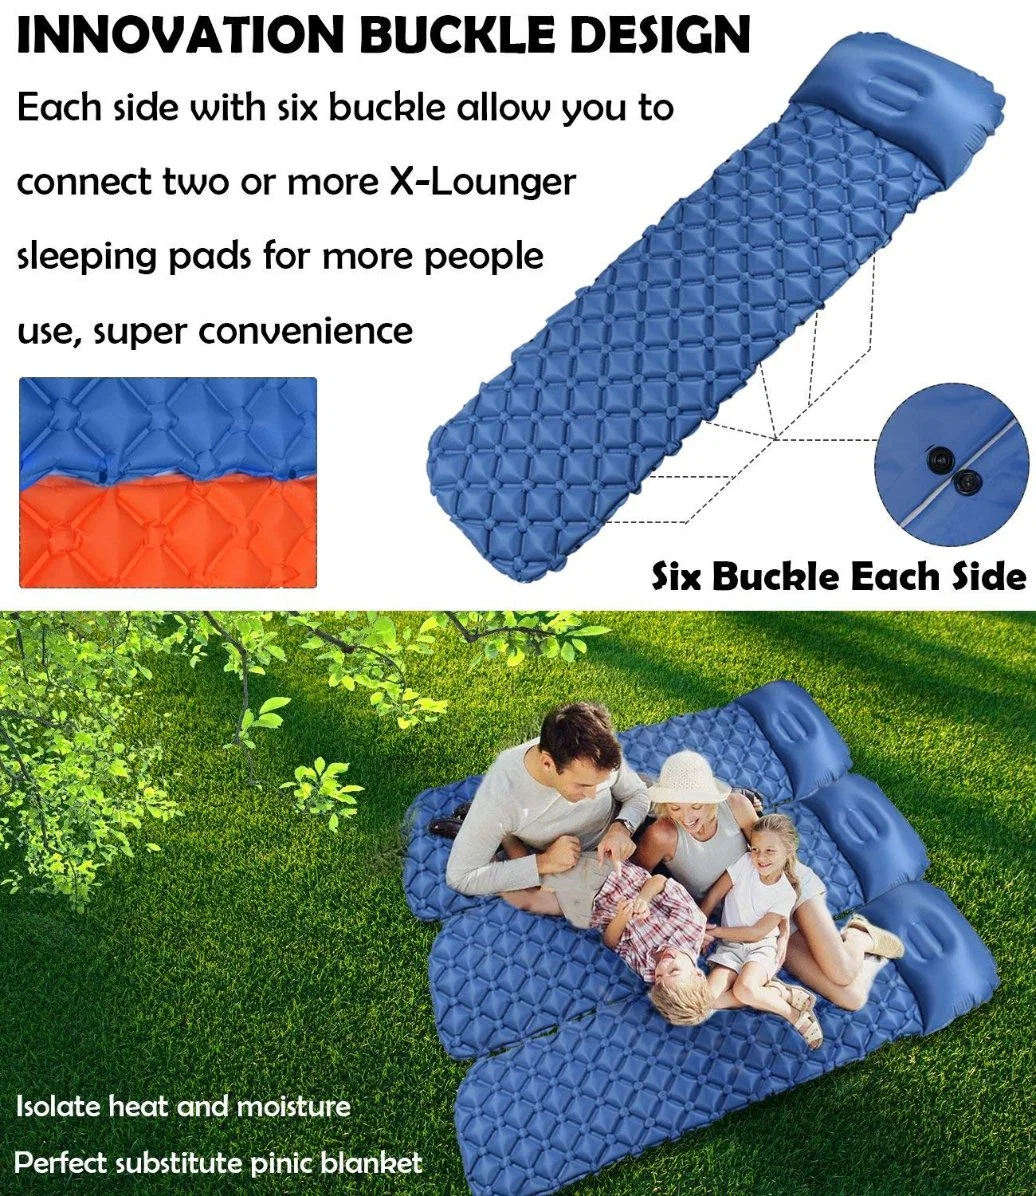 Portable Ultralight Sleeping Pad Self Inflating Mattress Pad with Pillow Inflatable Compact Sleeping Mat Camping Sleeping Pad